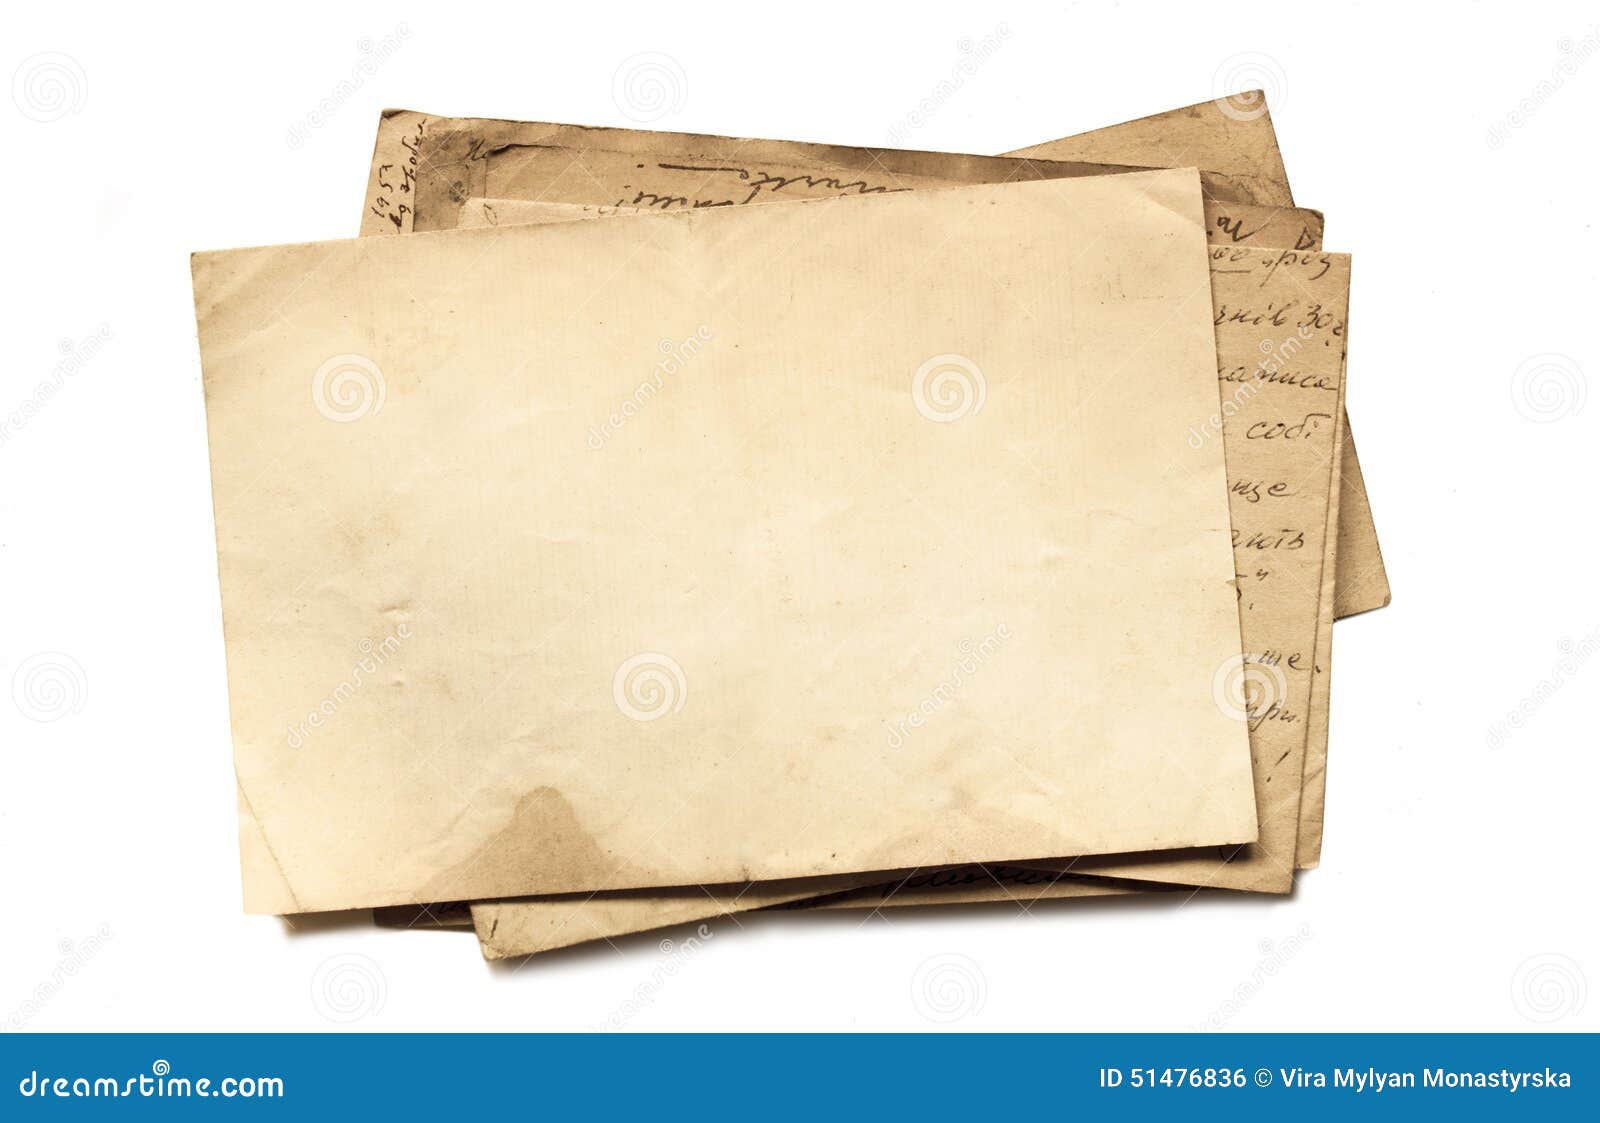 background with old papers and letters